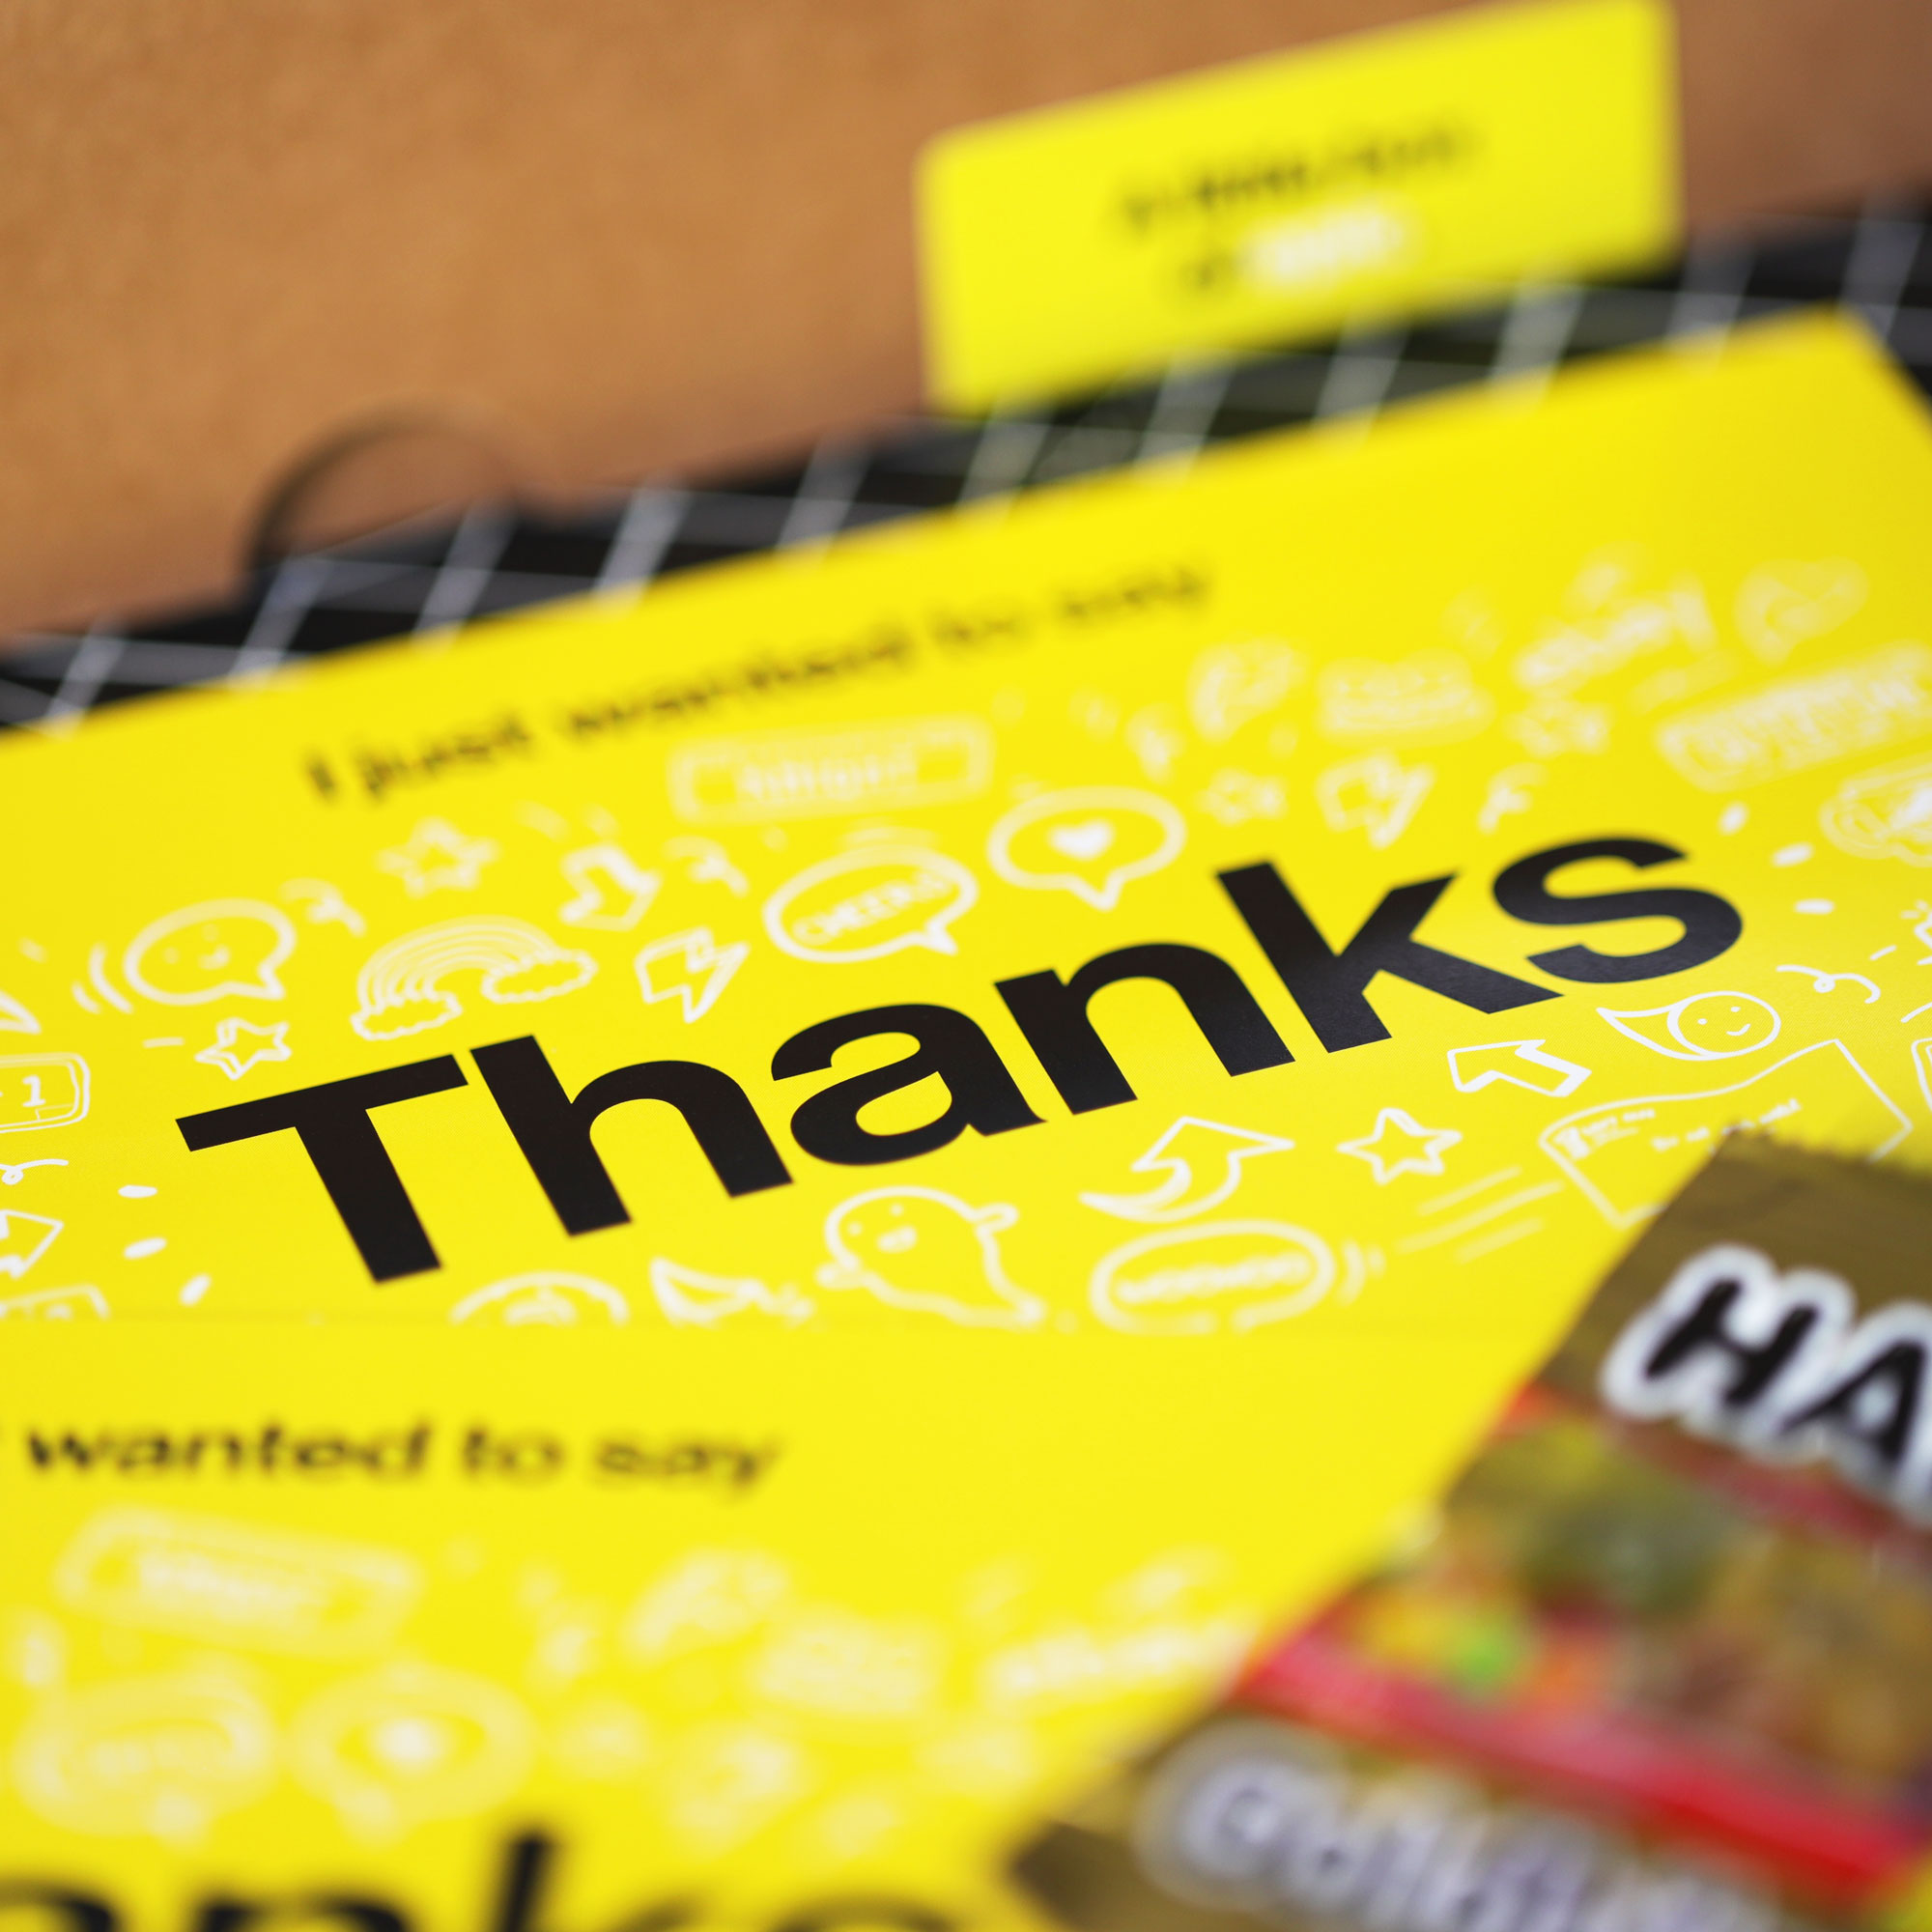 Mike Lane mods purchase 'thanks' card